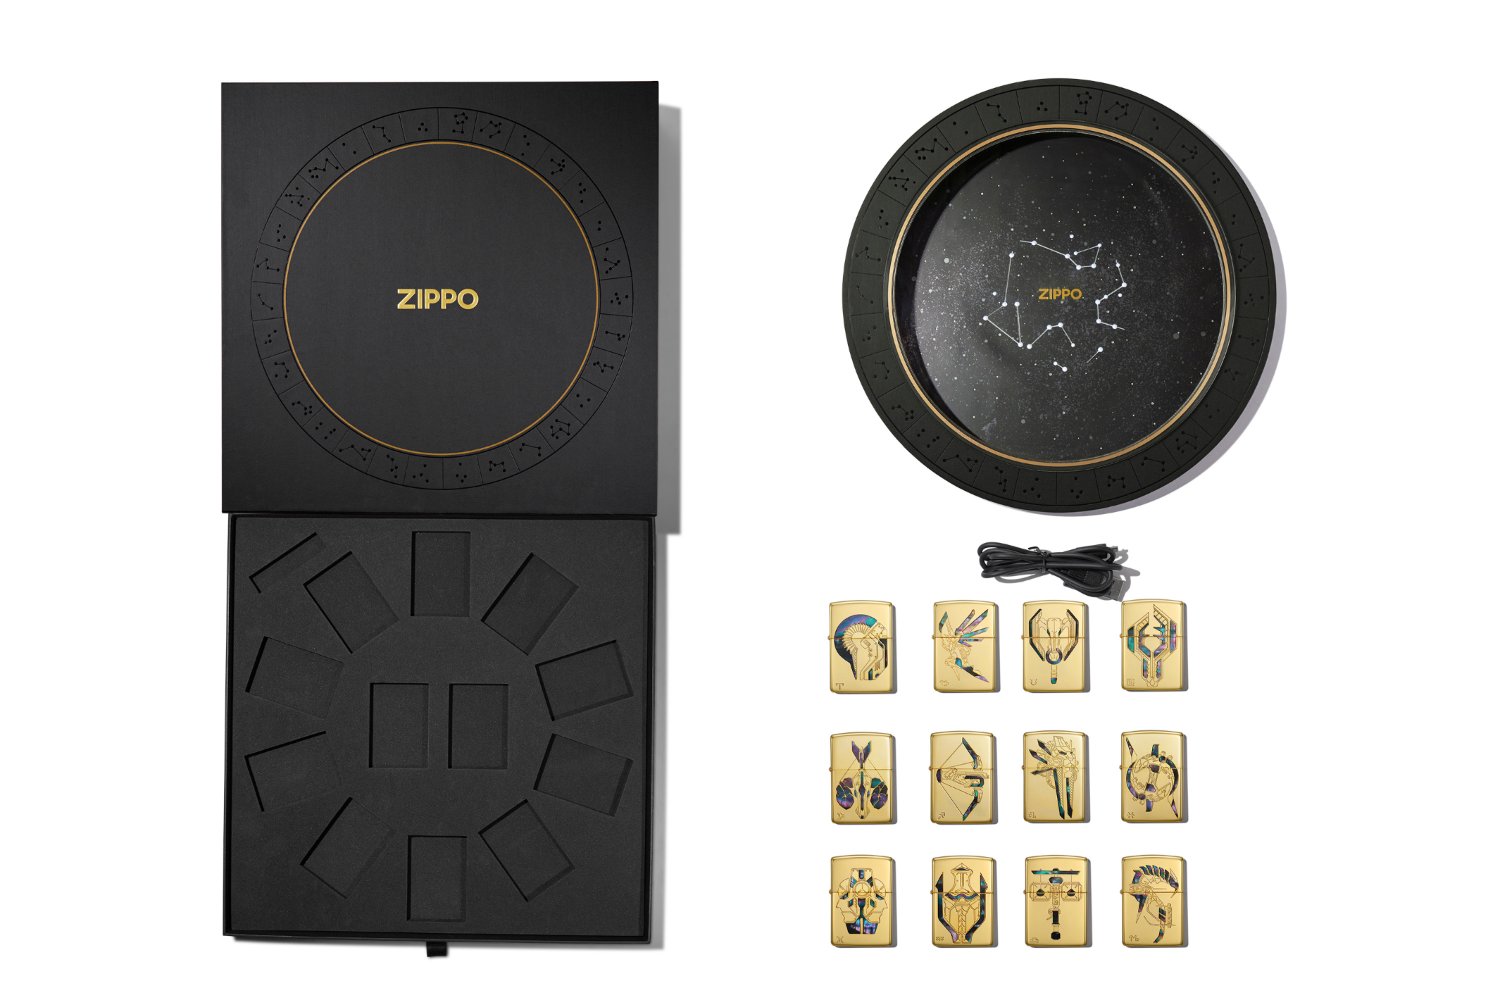 Zippo Constellation Limited Edition Packaging Is Inspired By The Stars